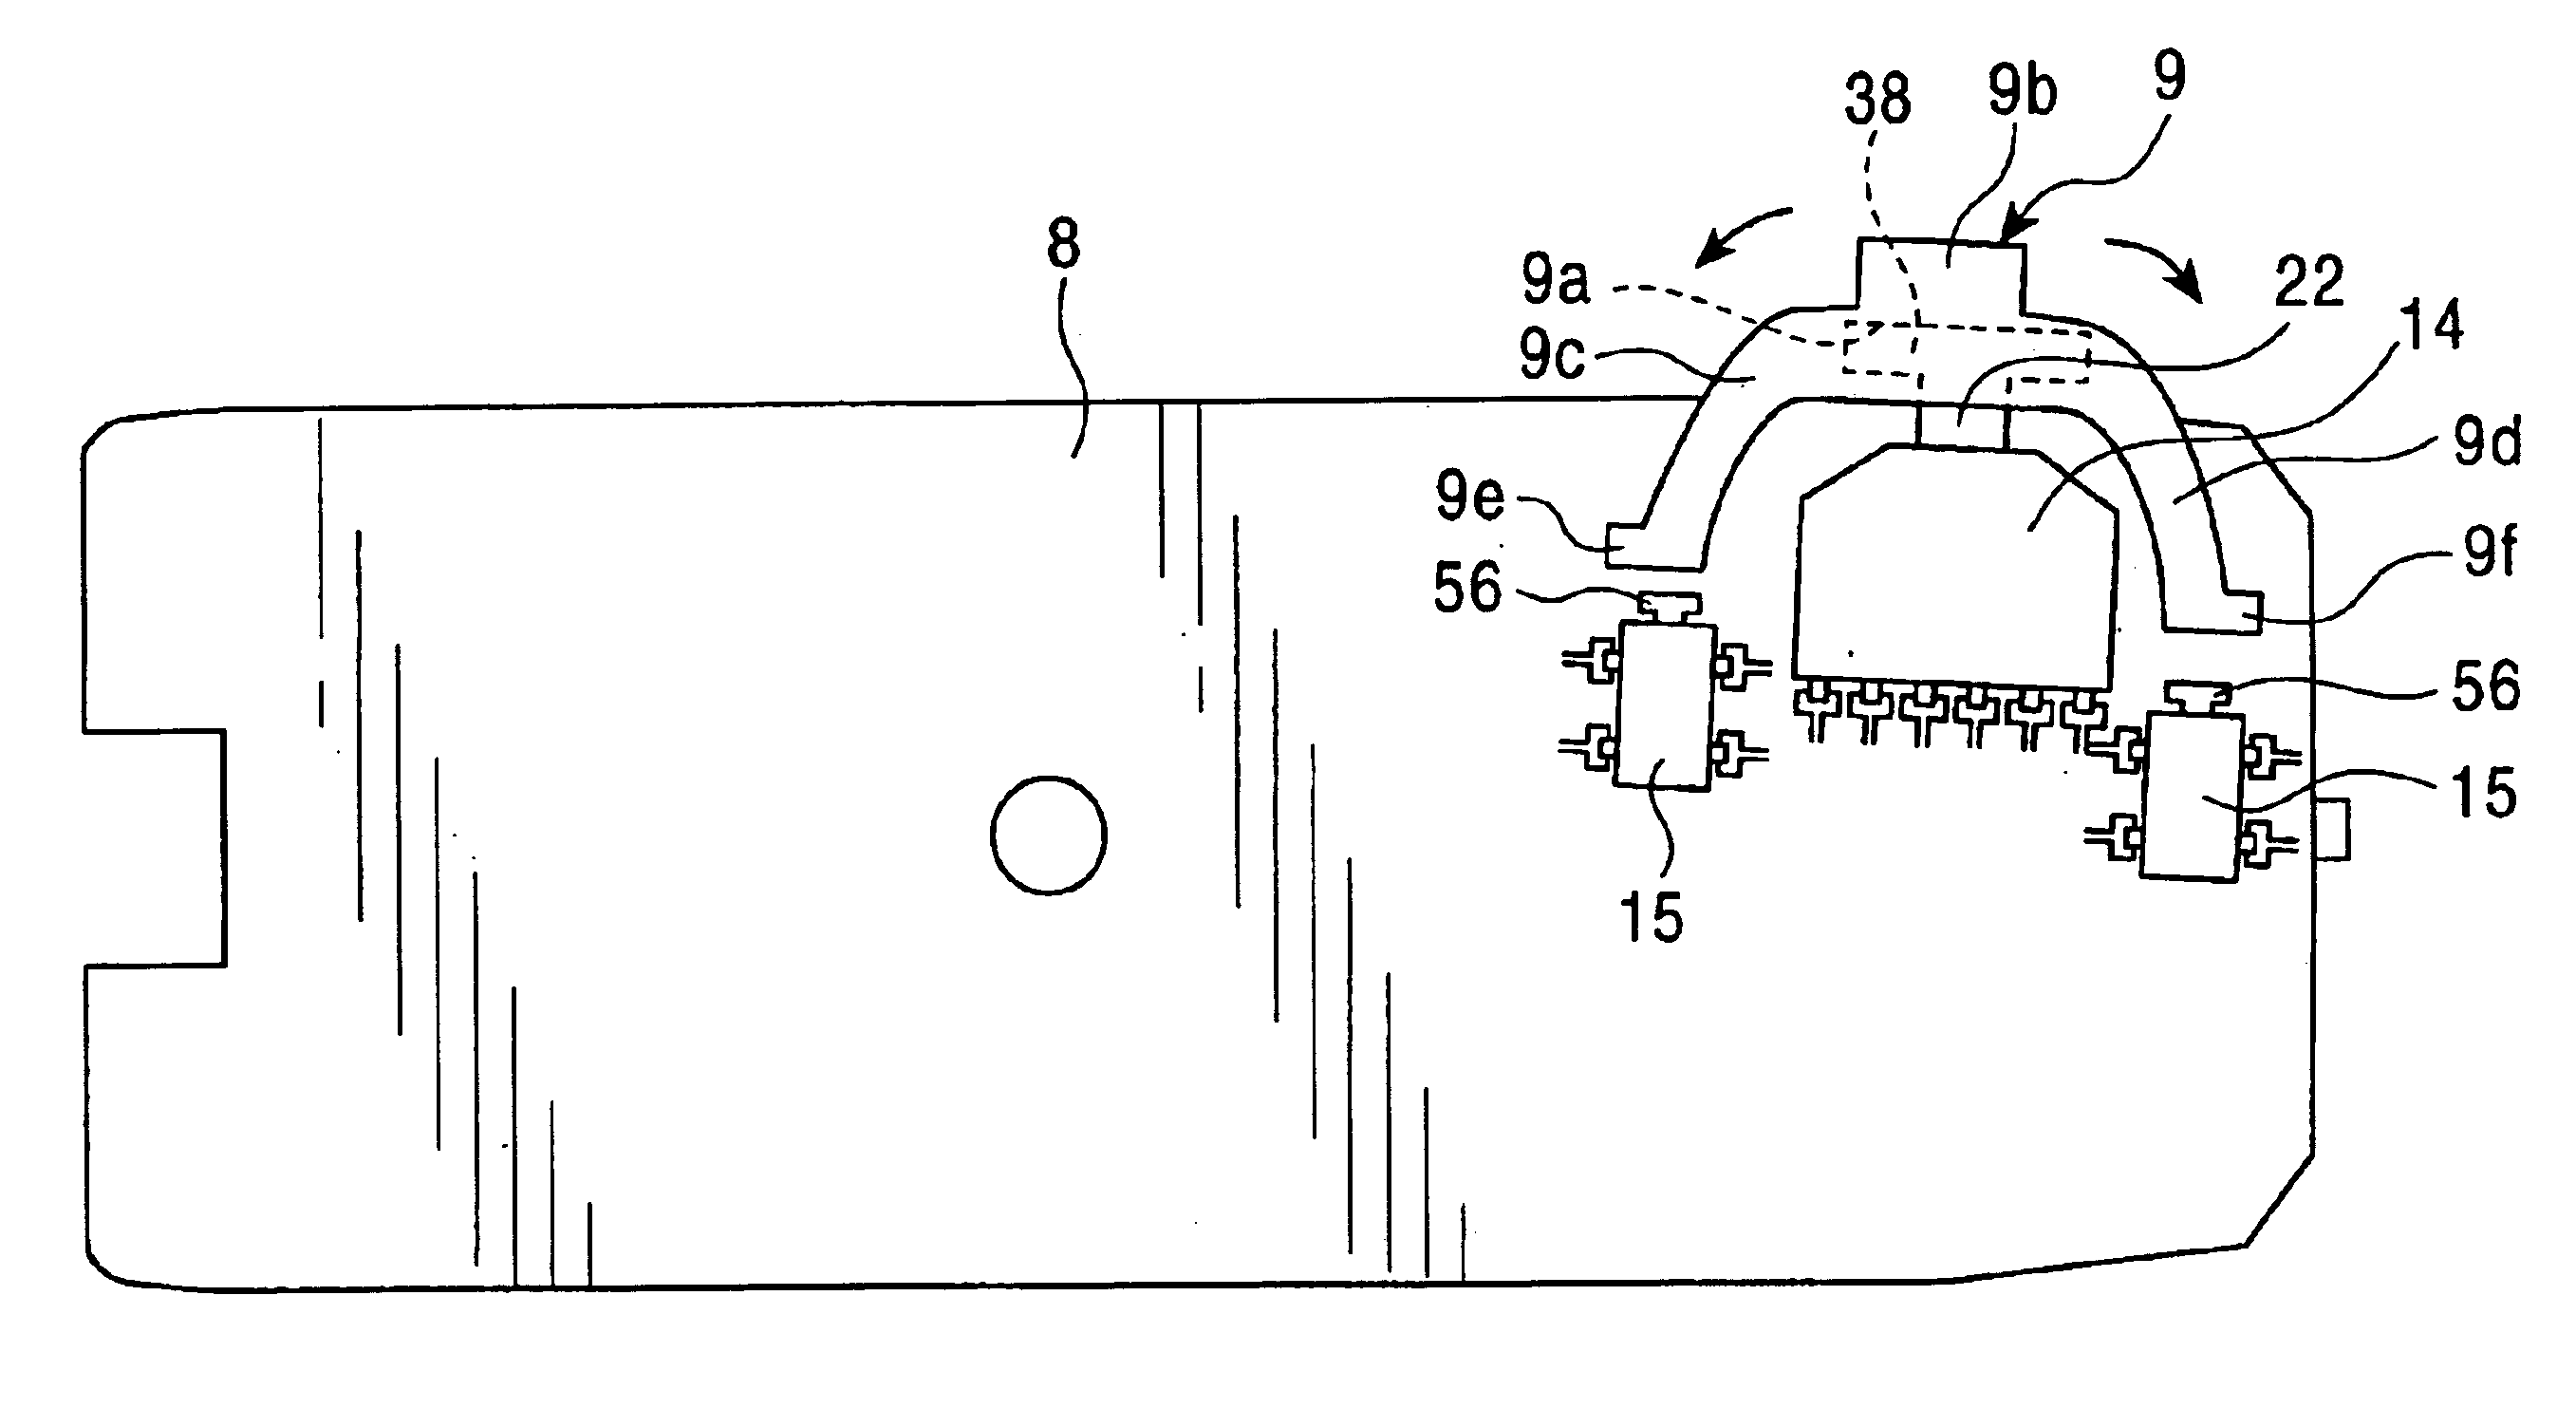 Switching device including stopper surface-mounted on printed circuit board